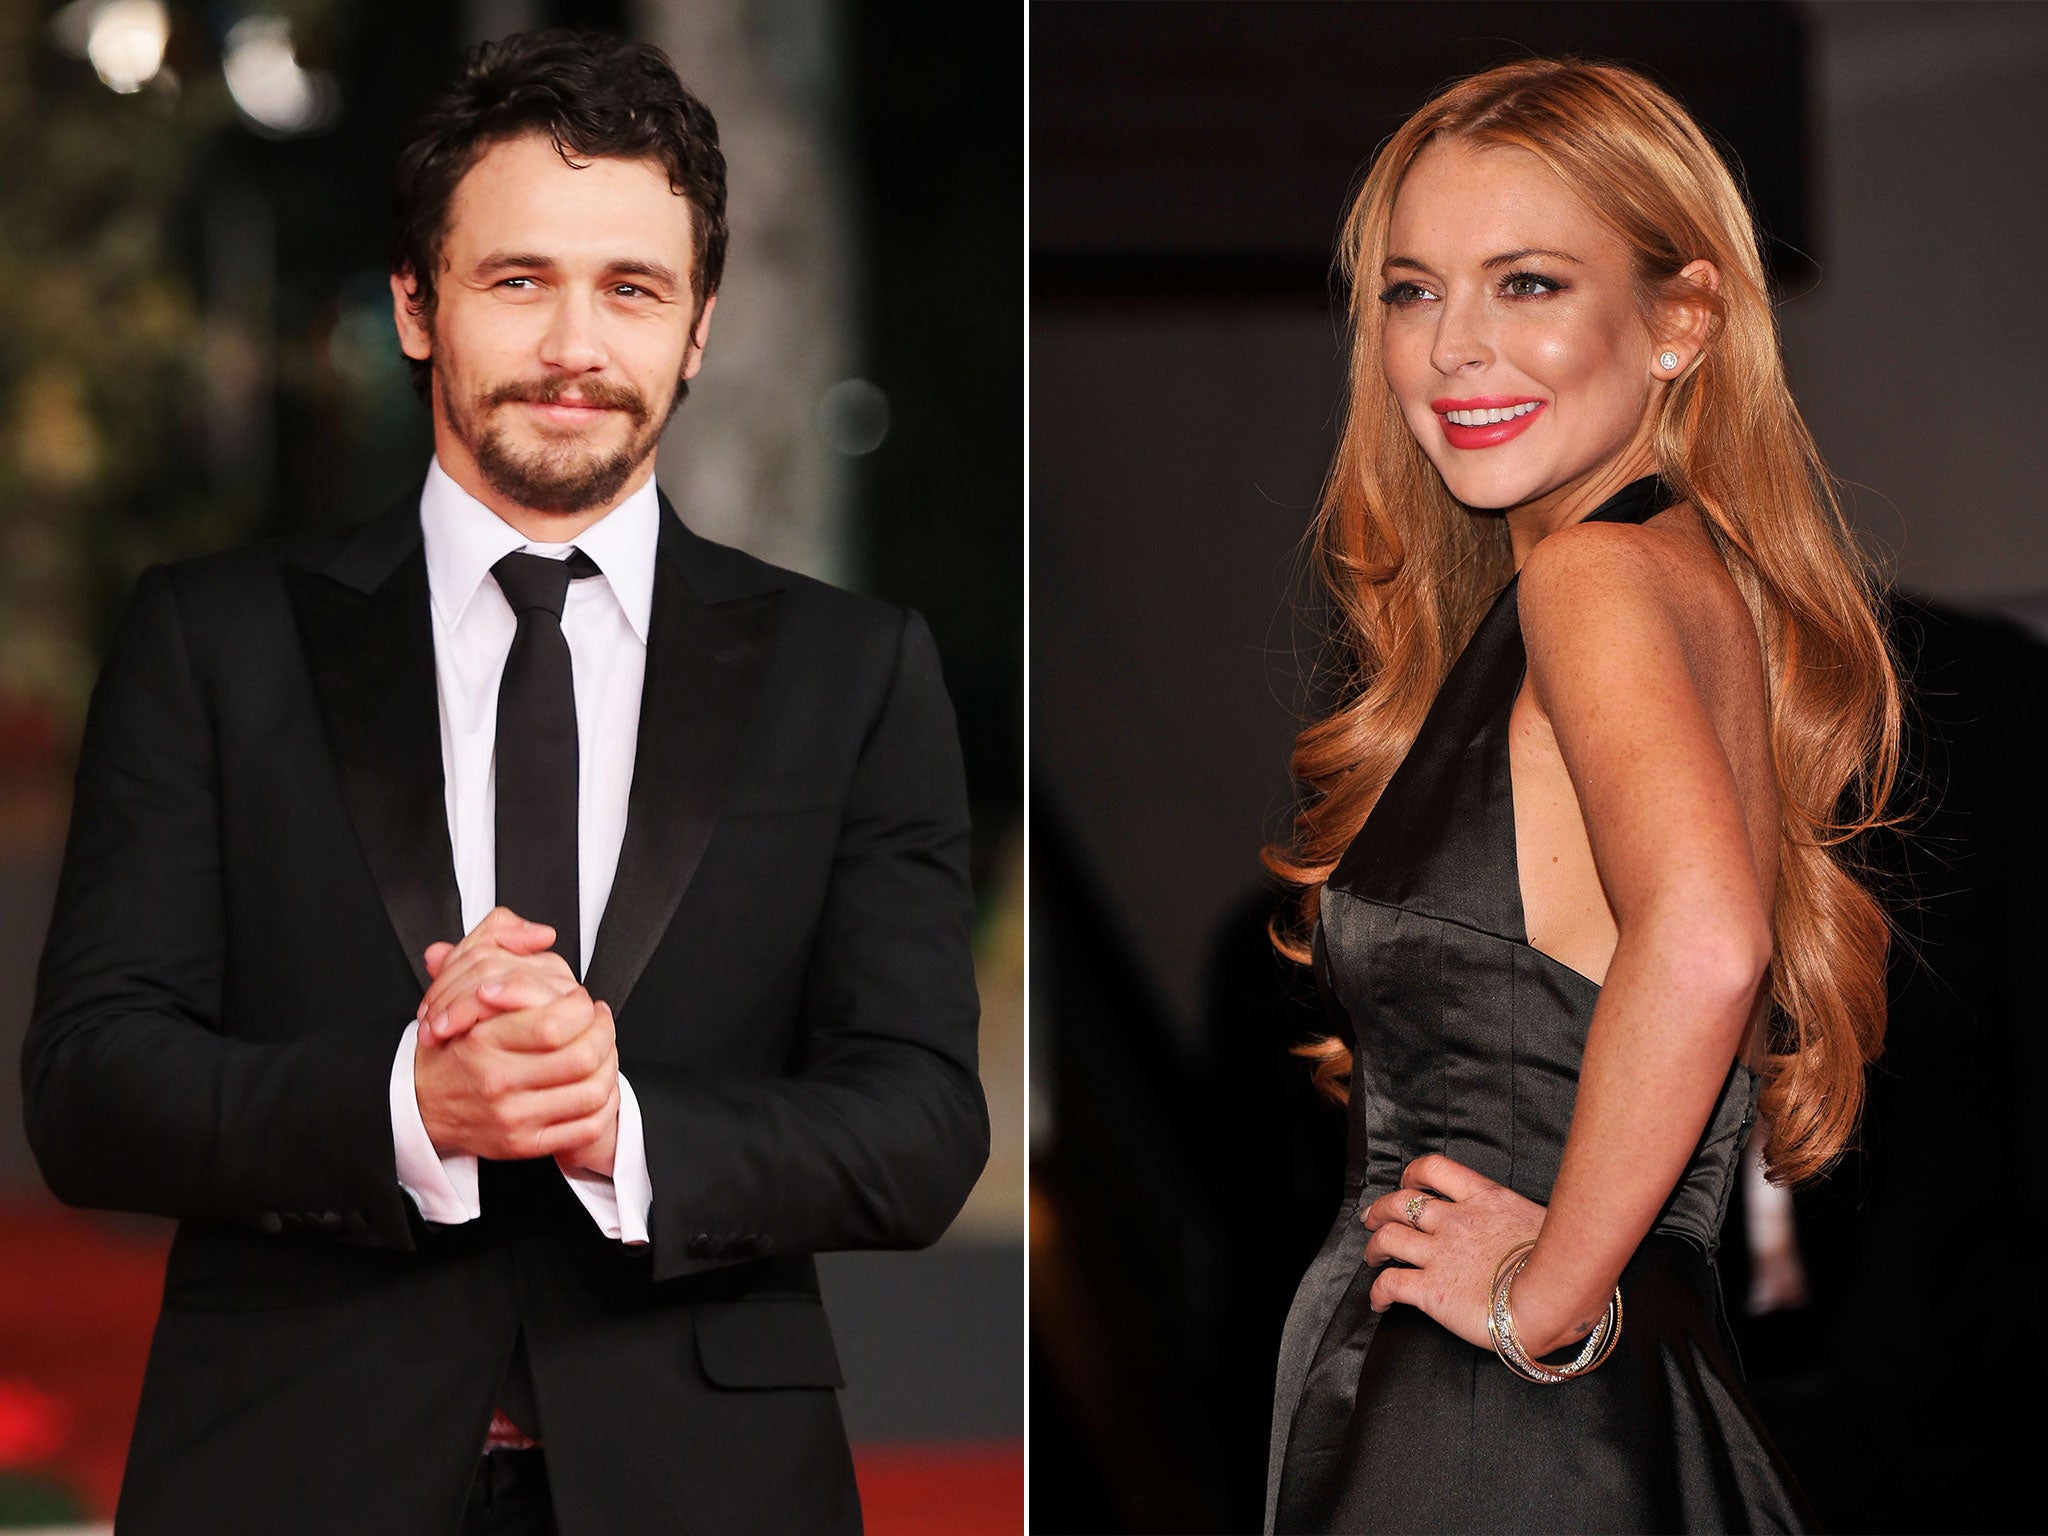 James Franco and Lindsay Lohan did not sleep together according to Franco, after Lohan published a list of her past lovers